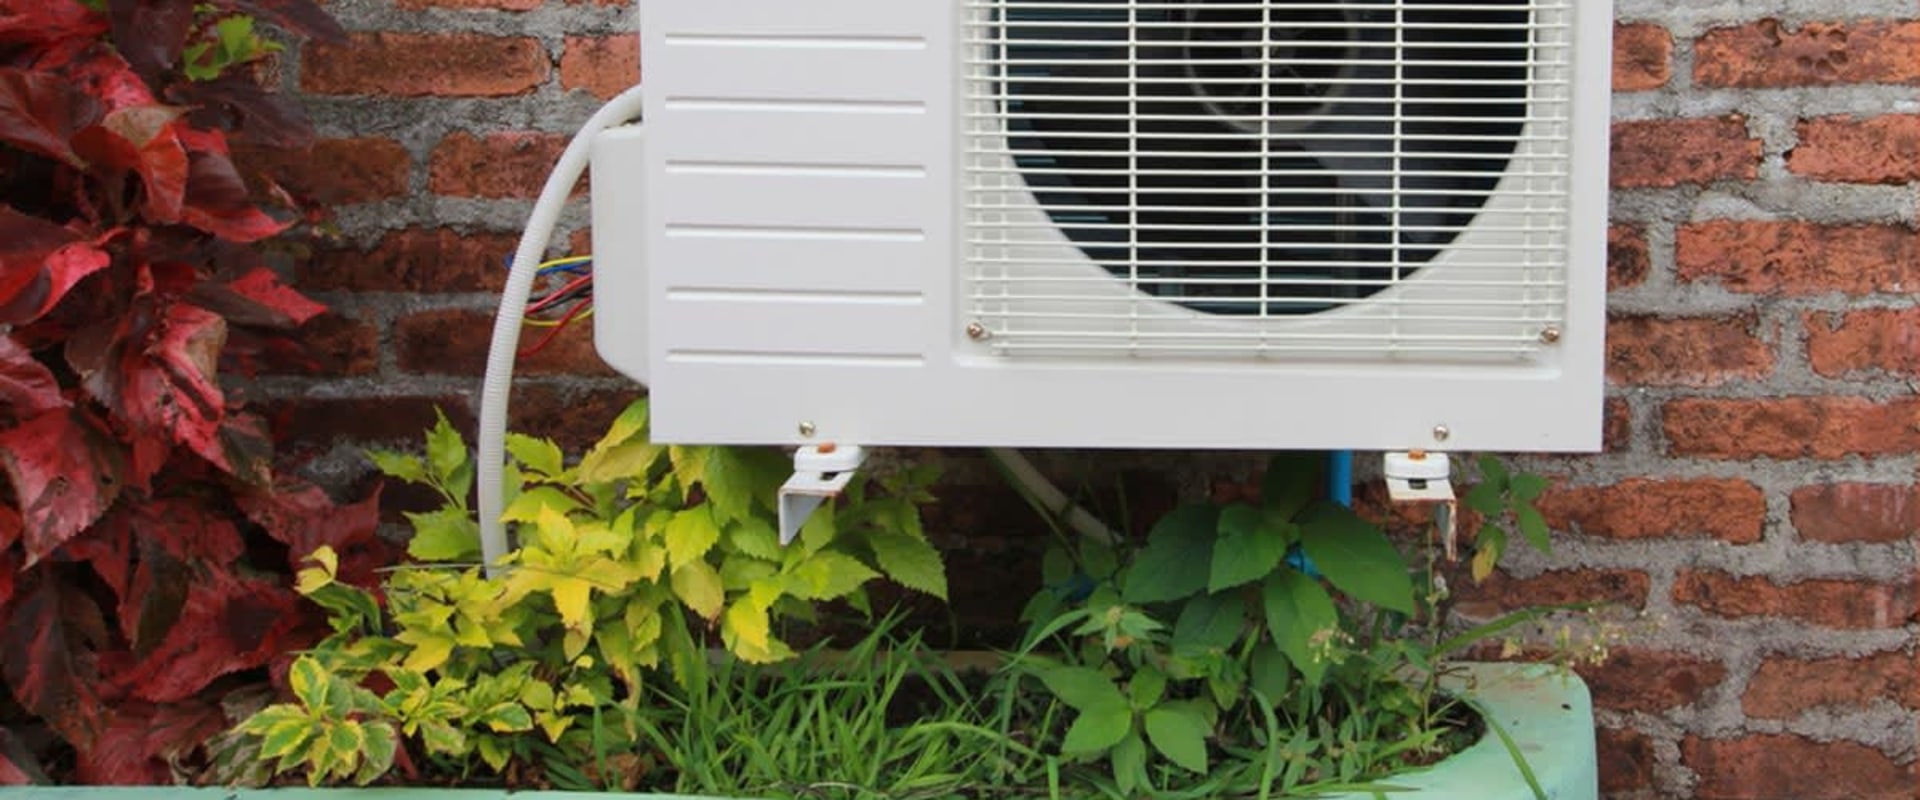 Central Air Conditioning vs Heat Pump for HVAC Replacement in Delray Beach, FL